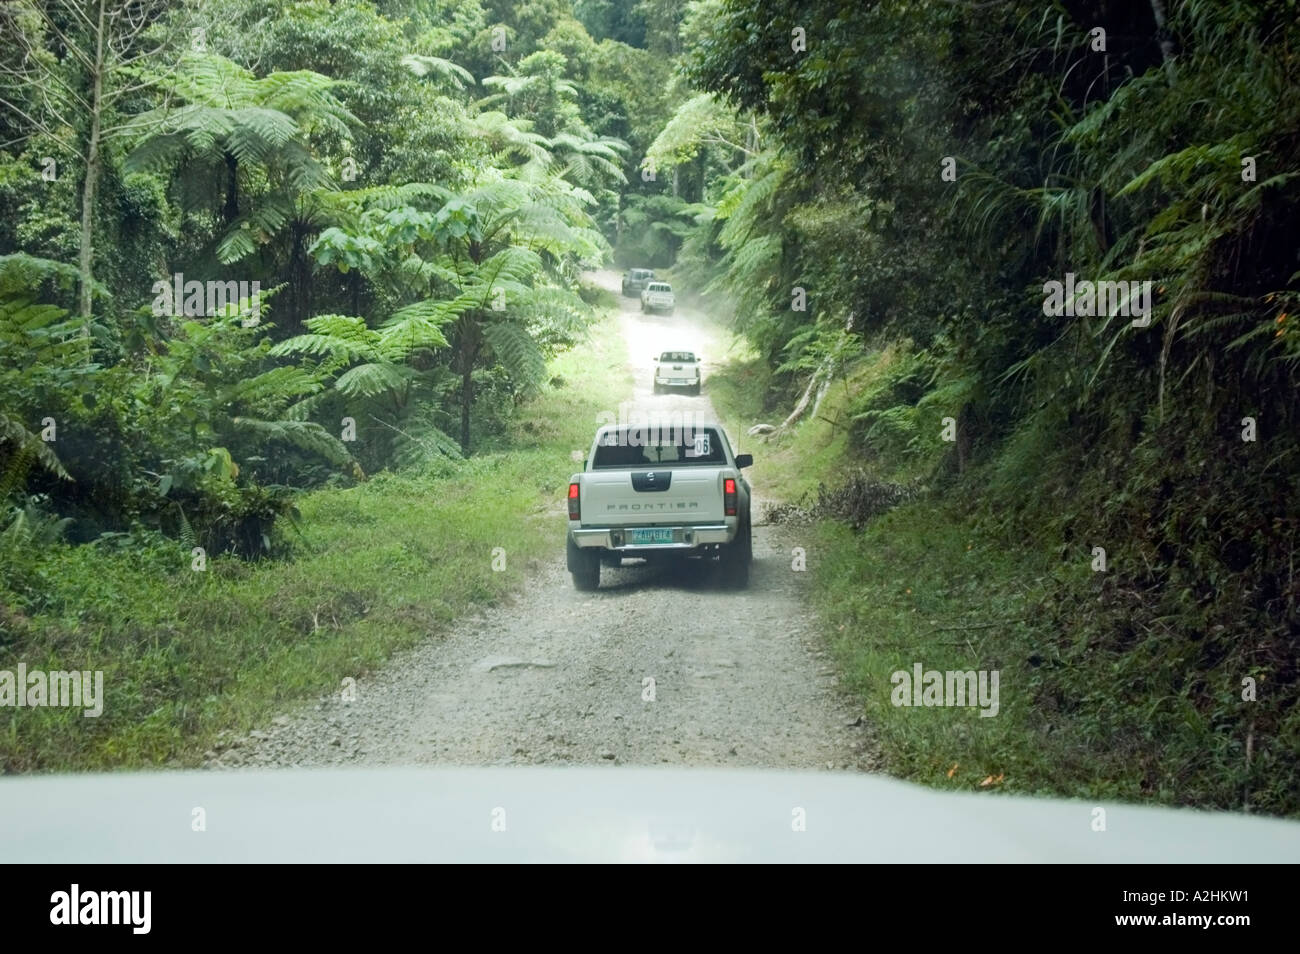 Security controlled convoy to prevent kidnapping, Tampakan, South Cotabato province, Mindanao, Philippines. Stock Photo